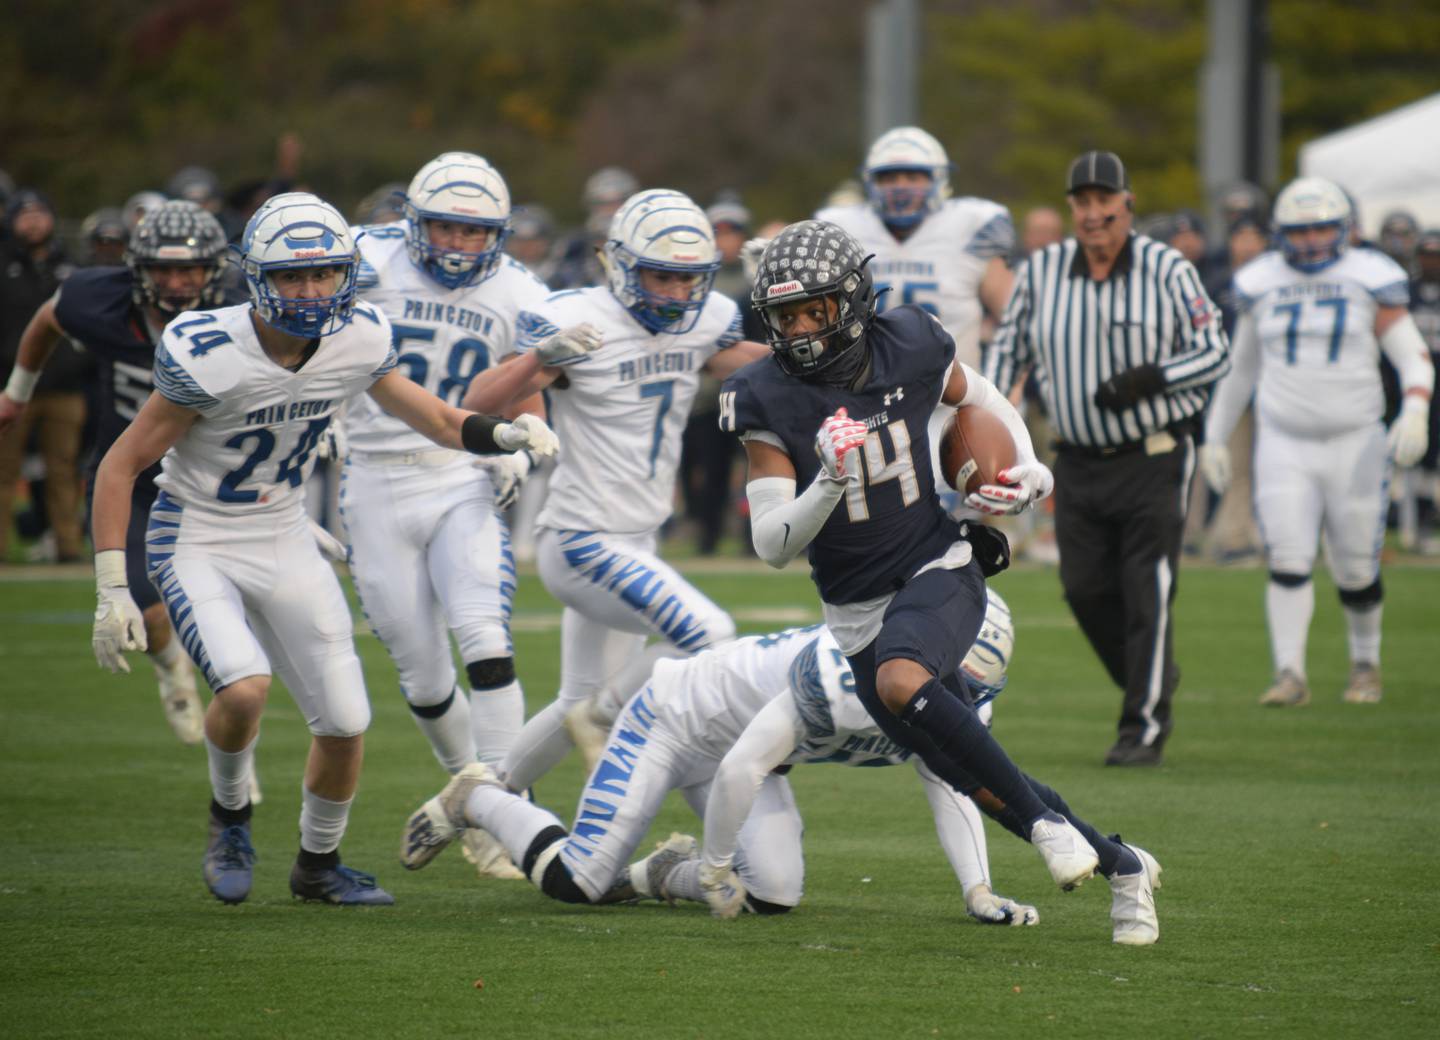 Immaculate Conception's Kareem Parker runs the field during the quarterfinal game against Princeton Saturday Nov. 13, 2021.